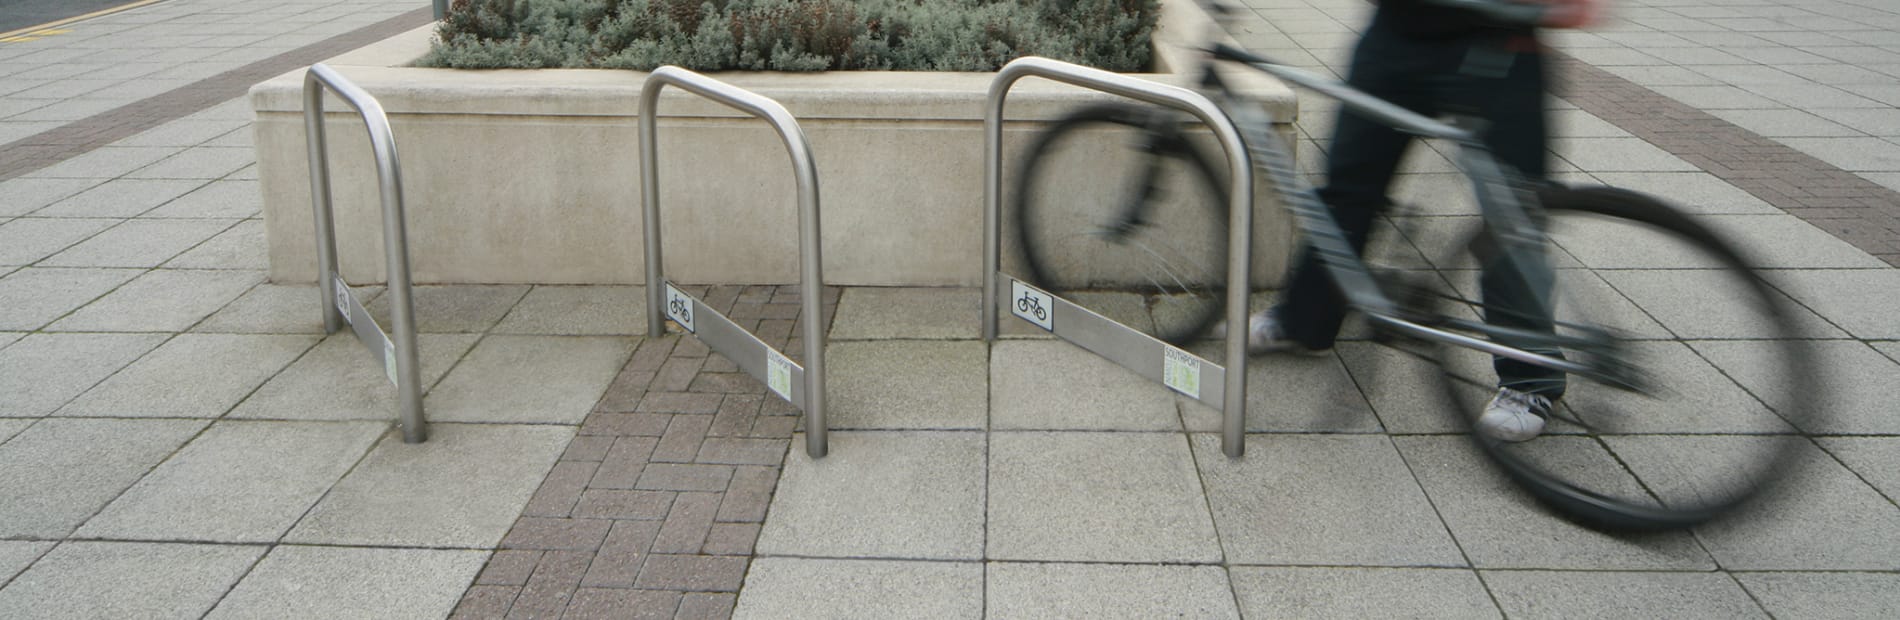 cycle rack stainless steel with a man attaching his bike